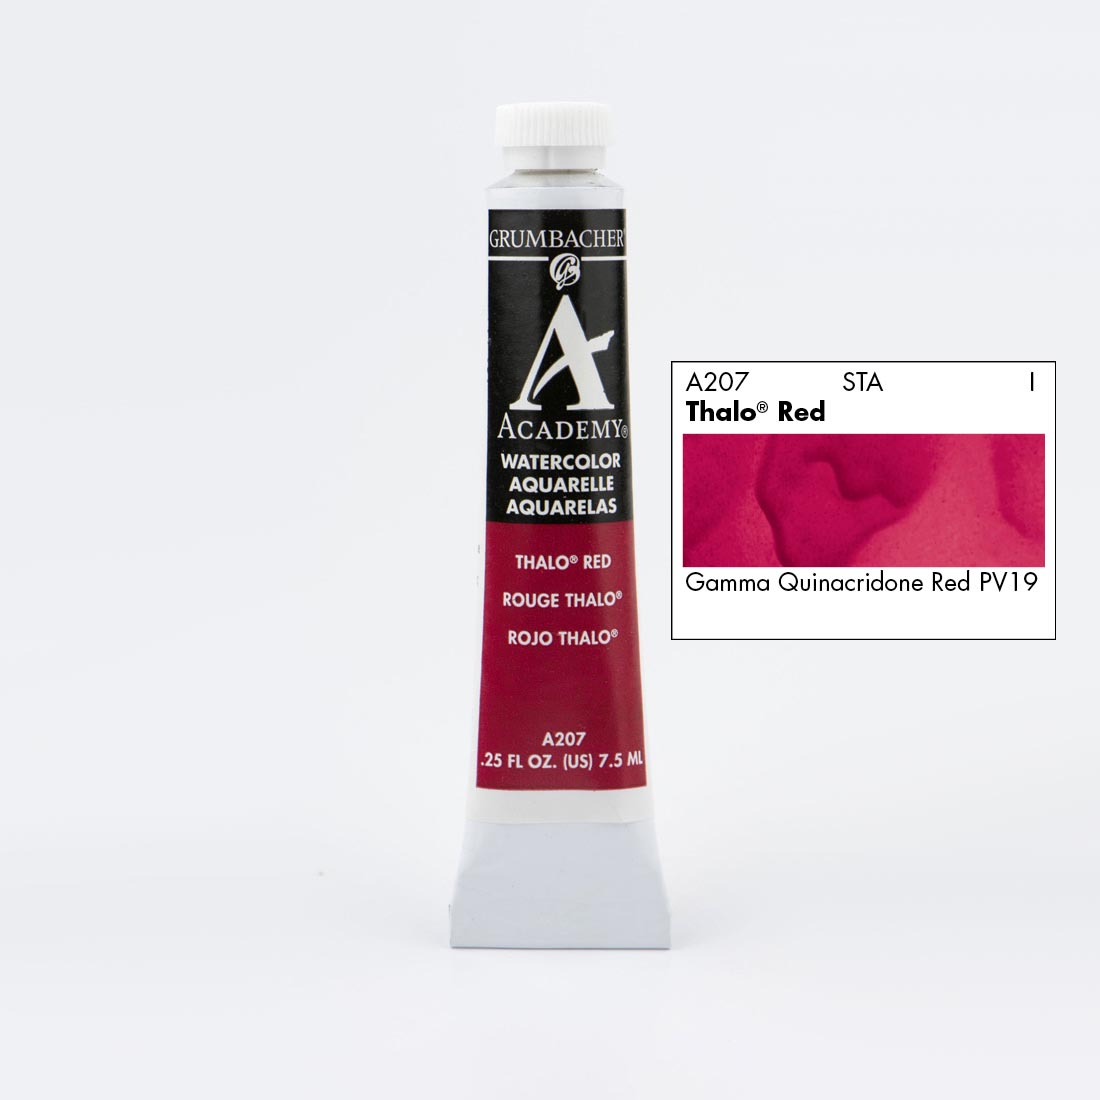 Tube of Grumbacher Academy Watercolor beside Thalo Red color swatch